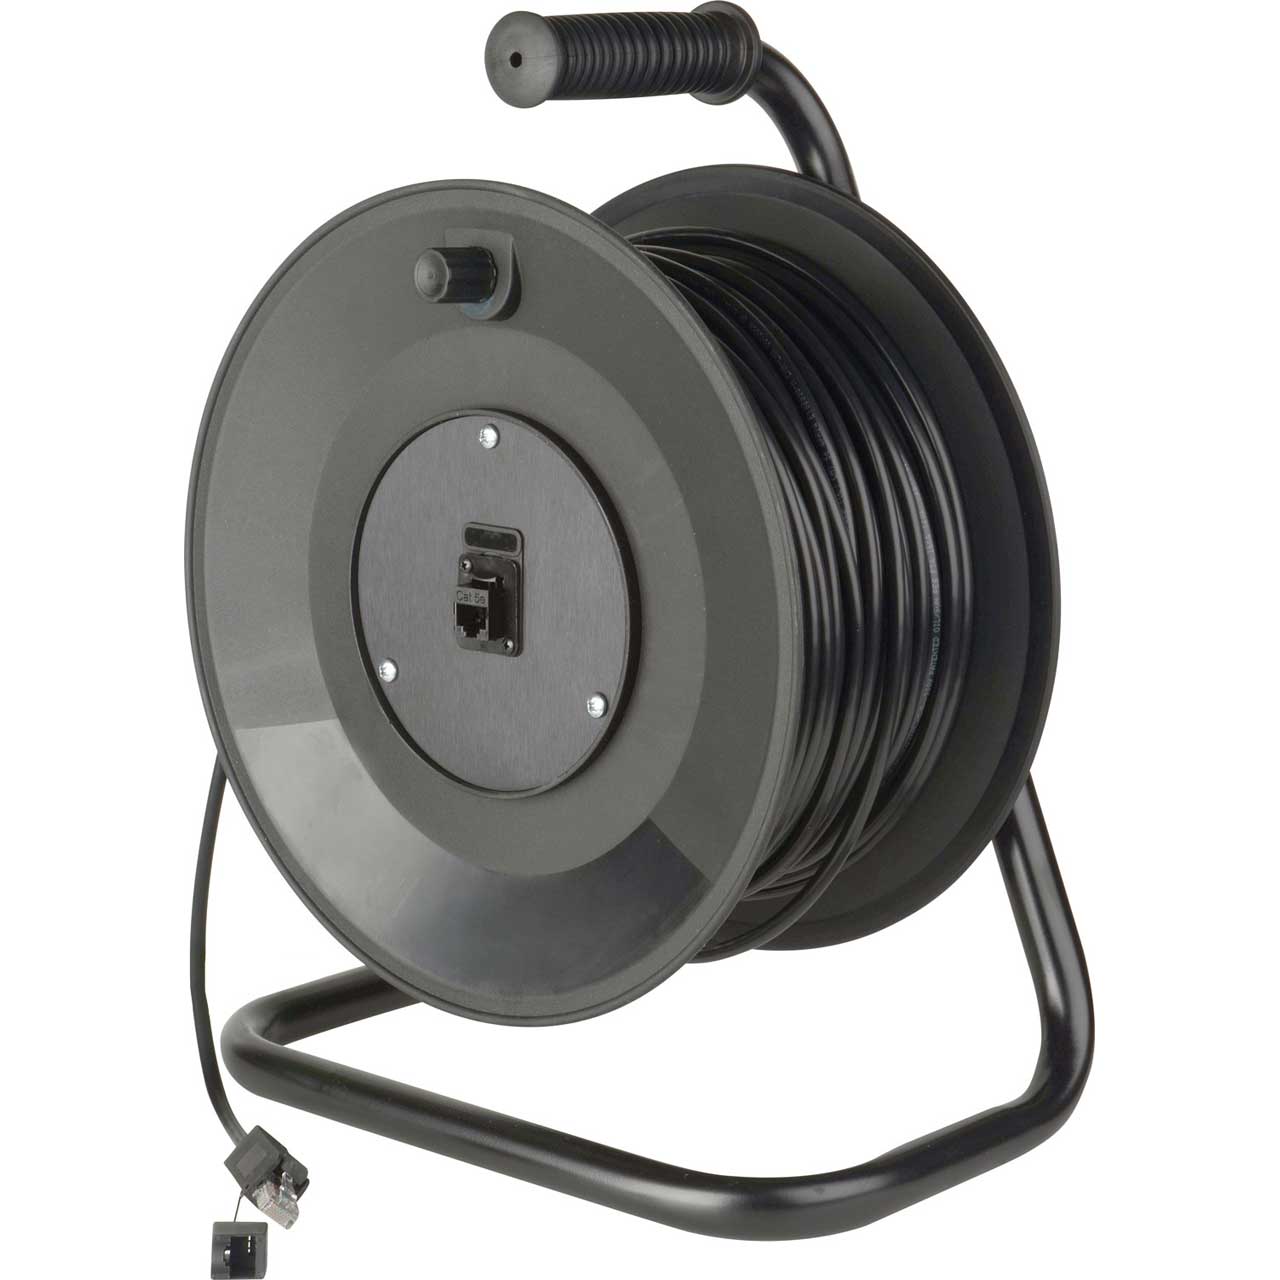 Jackreel Connect-N-Go Reel Belden 7923A Cat5e with Pro Shell Connectors 200  Foot